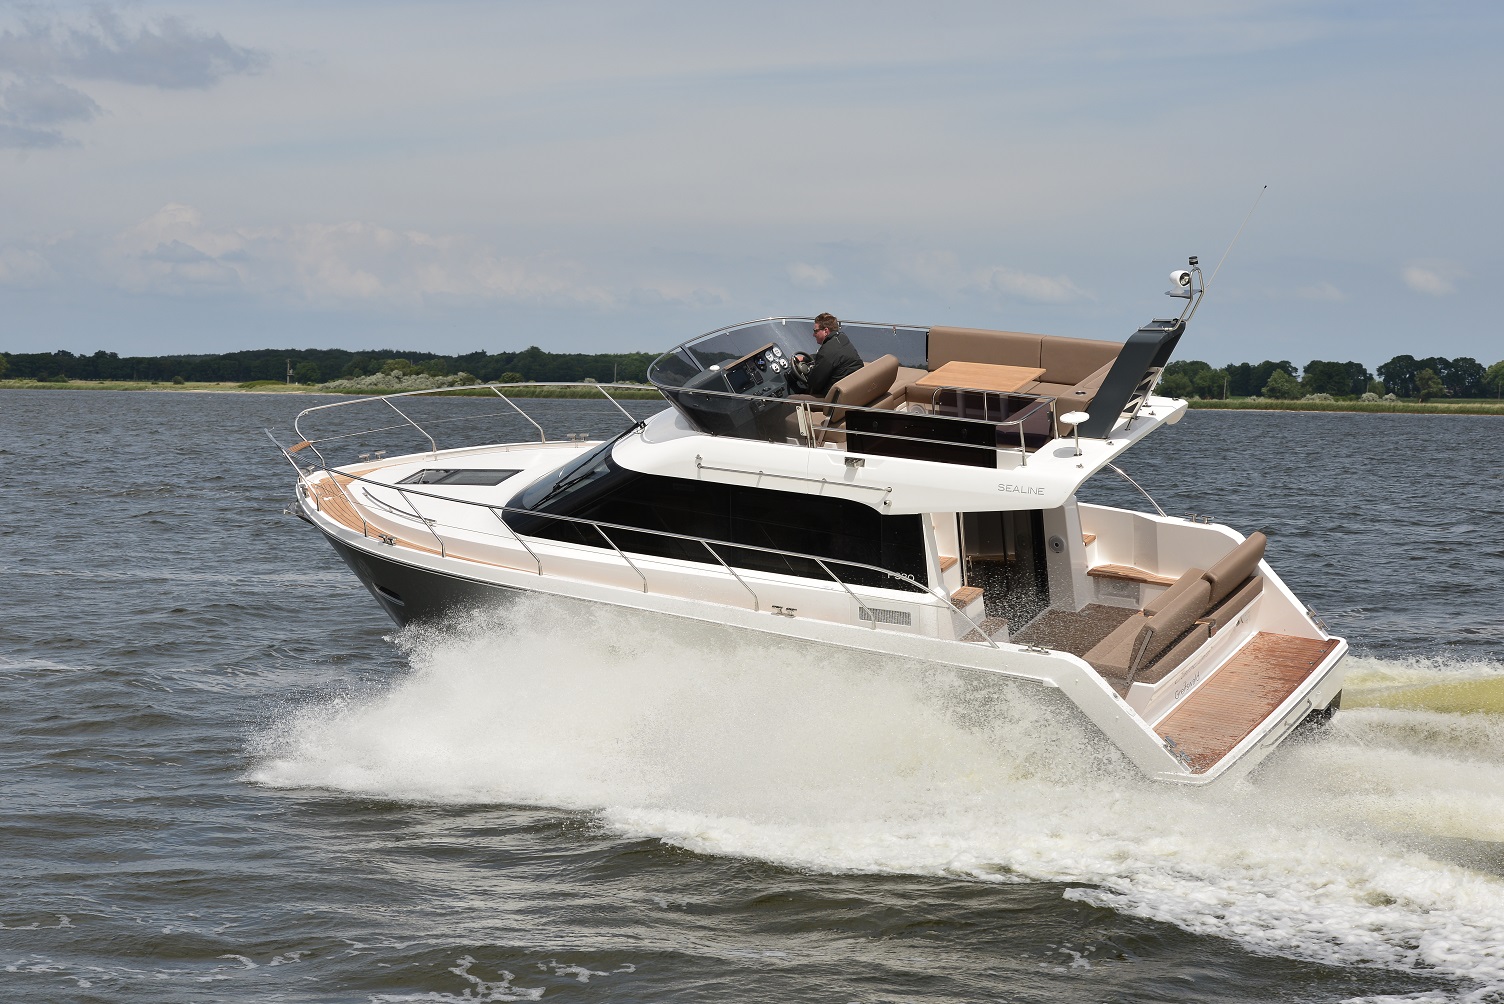  Southampton Boat Show (12-21 September), including the brand new F380